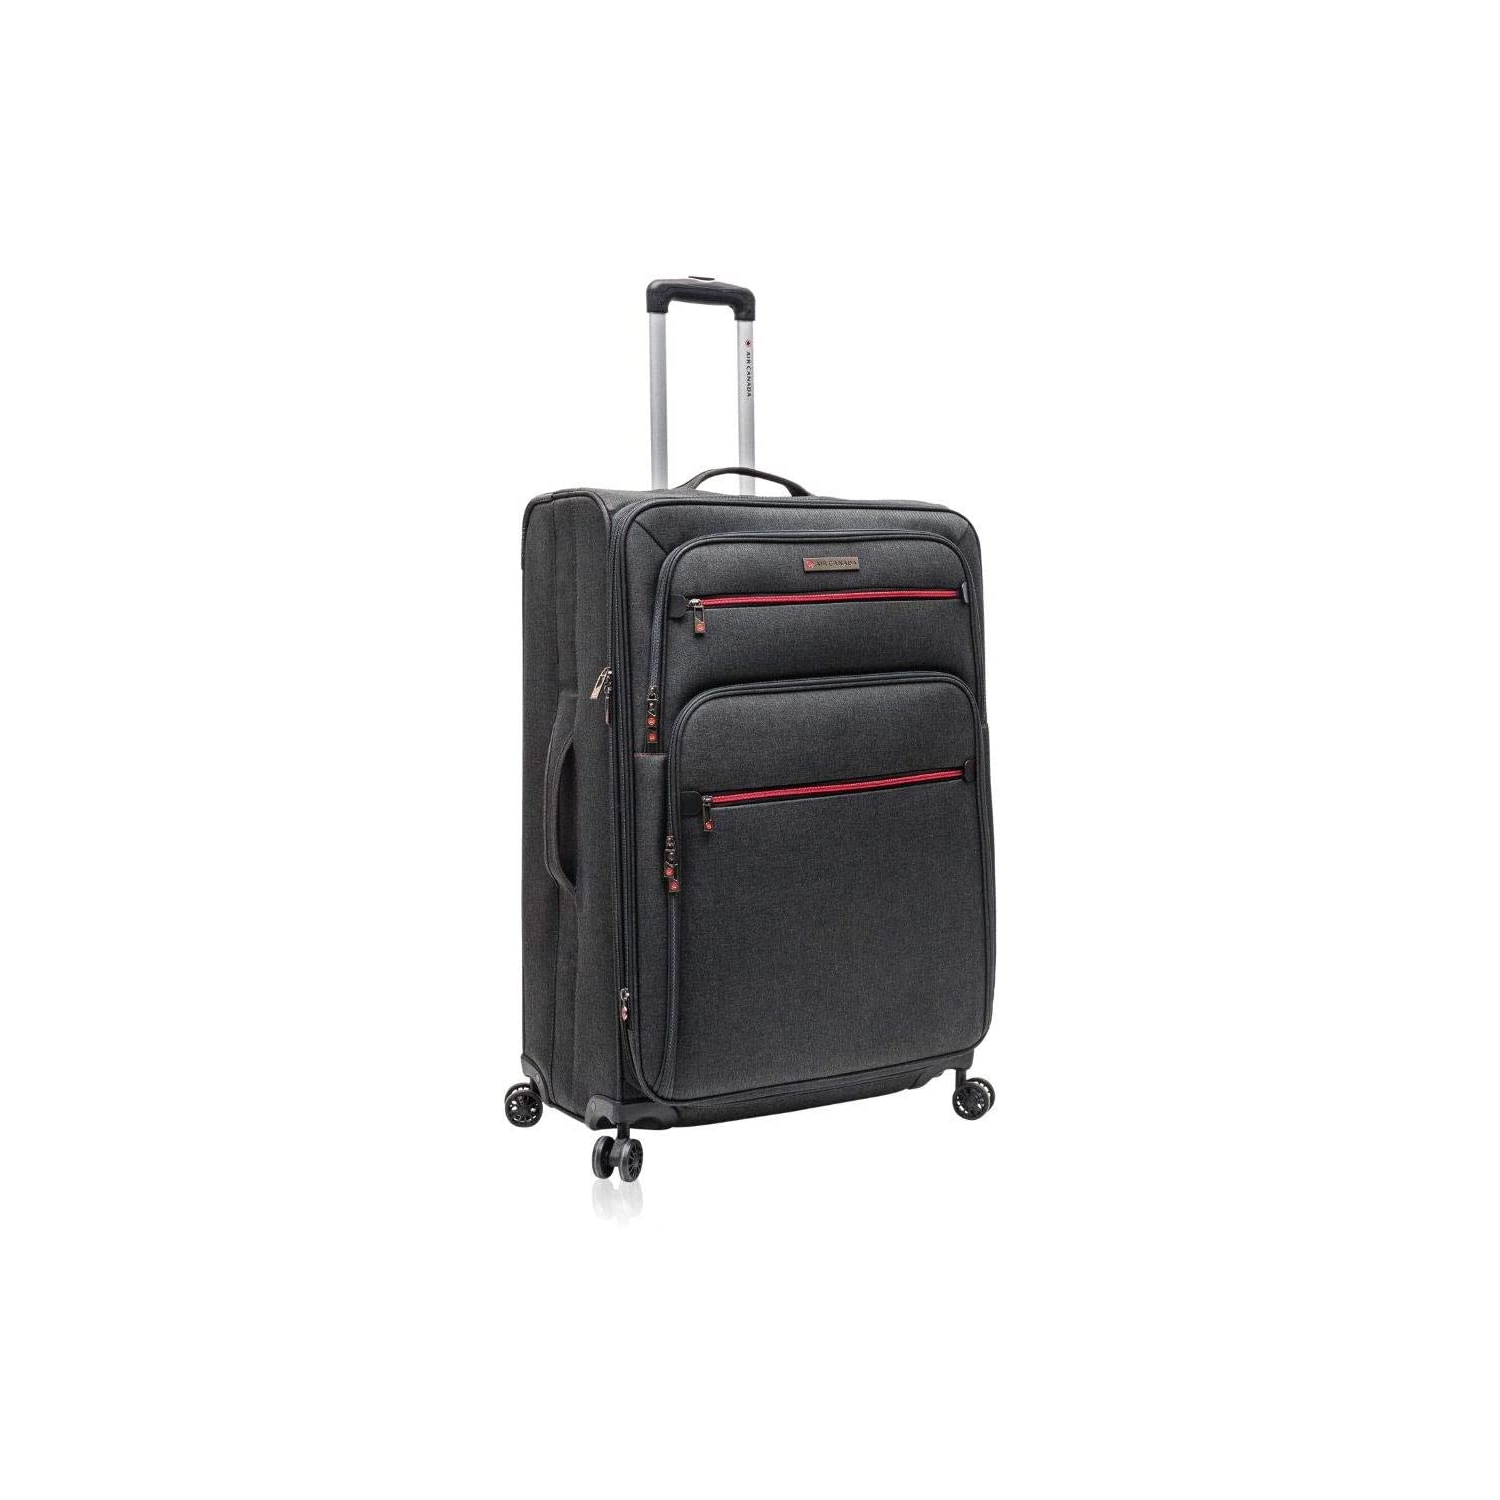 Luggage Sets 3 Piece Suitcase Set 20/24/28,Carry on Luggage Airline  Approved,Hard Case with Spinner Wheels - Bed Bath & Beyond - 38422008